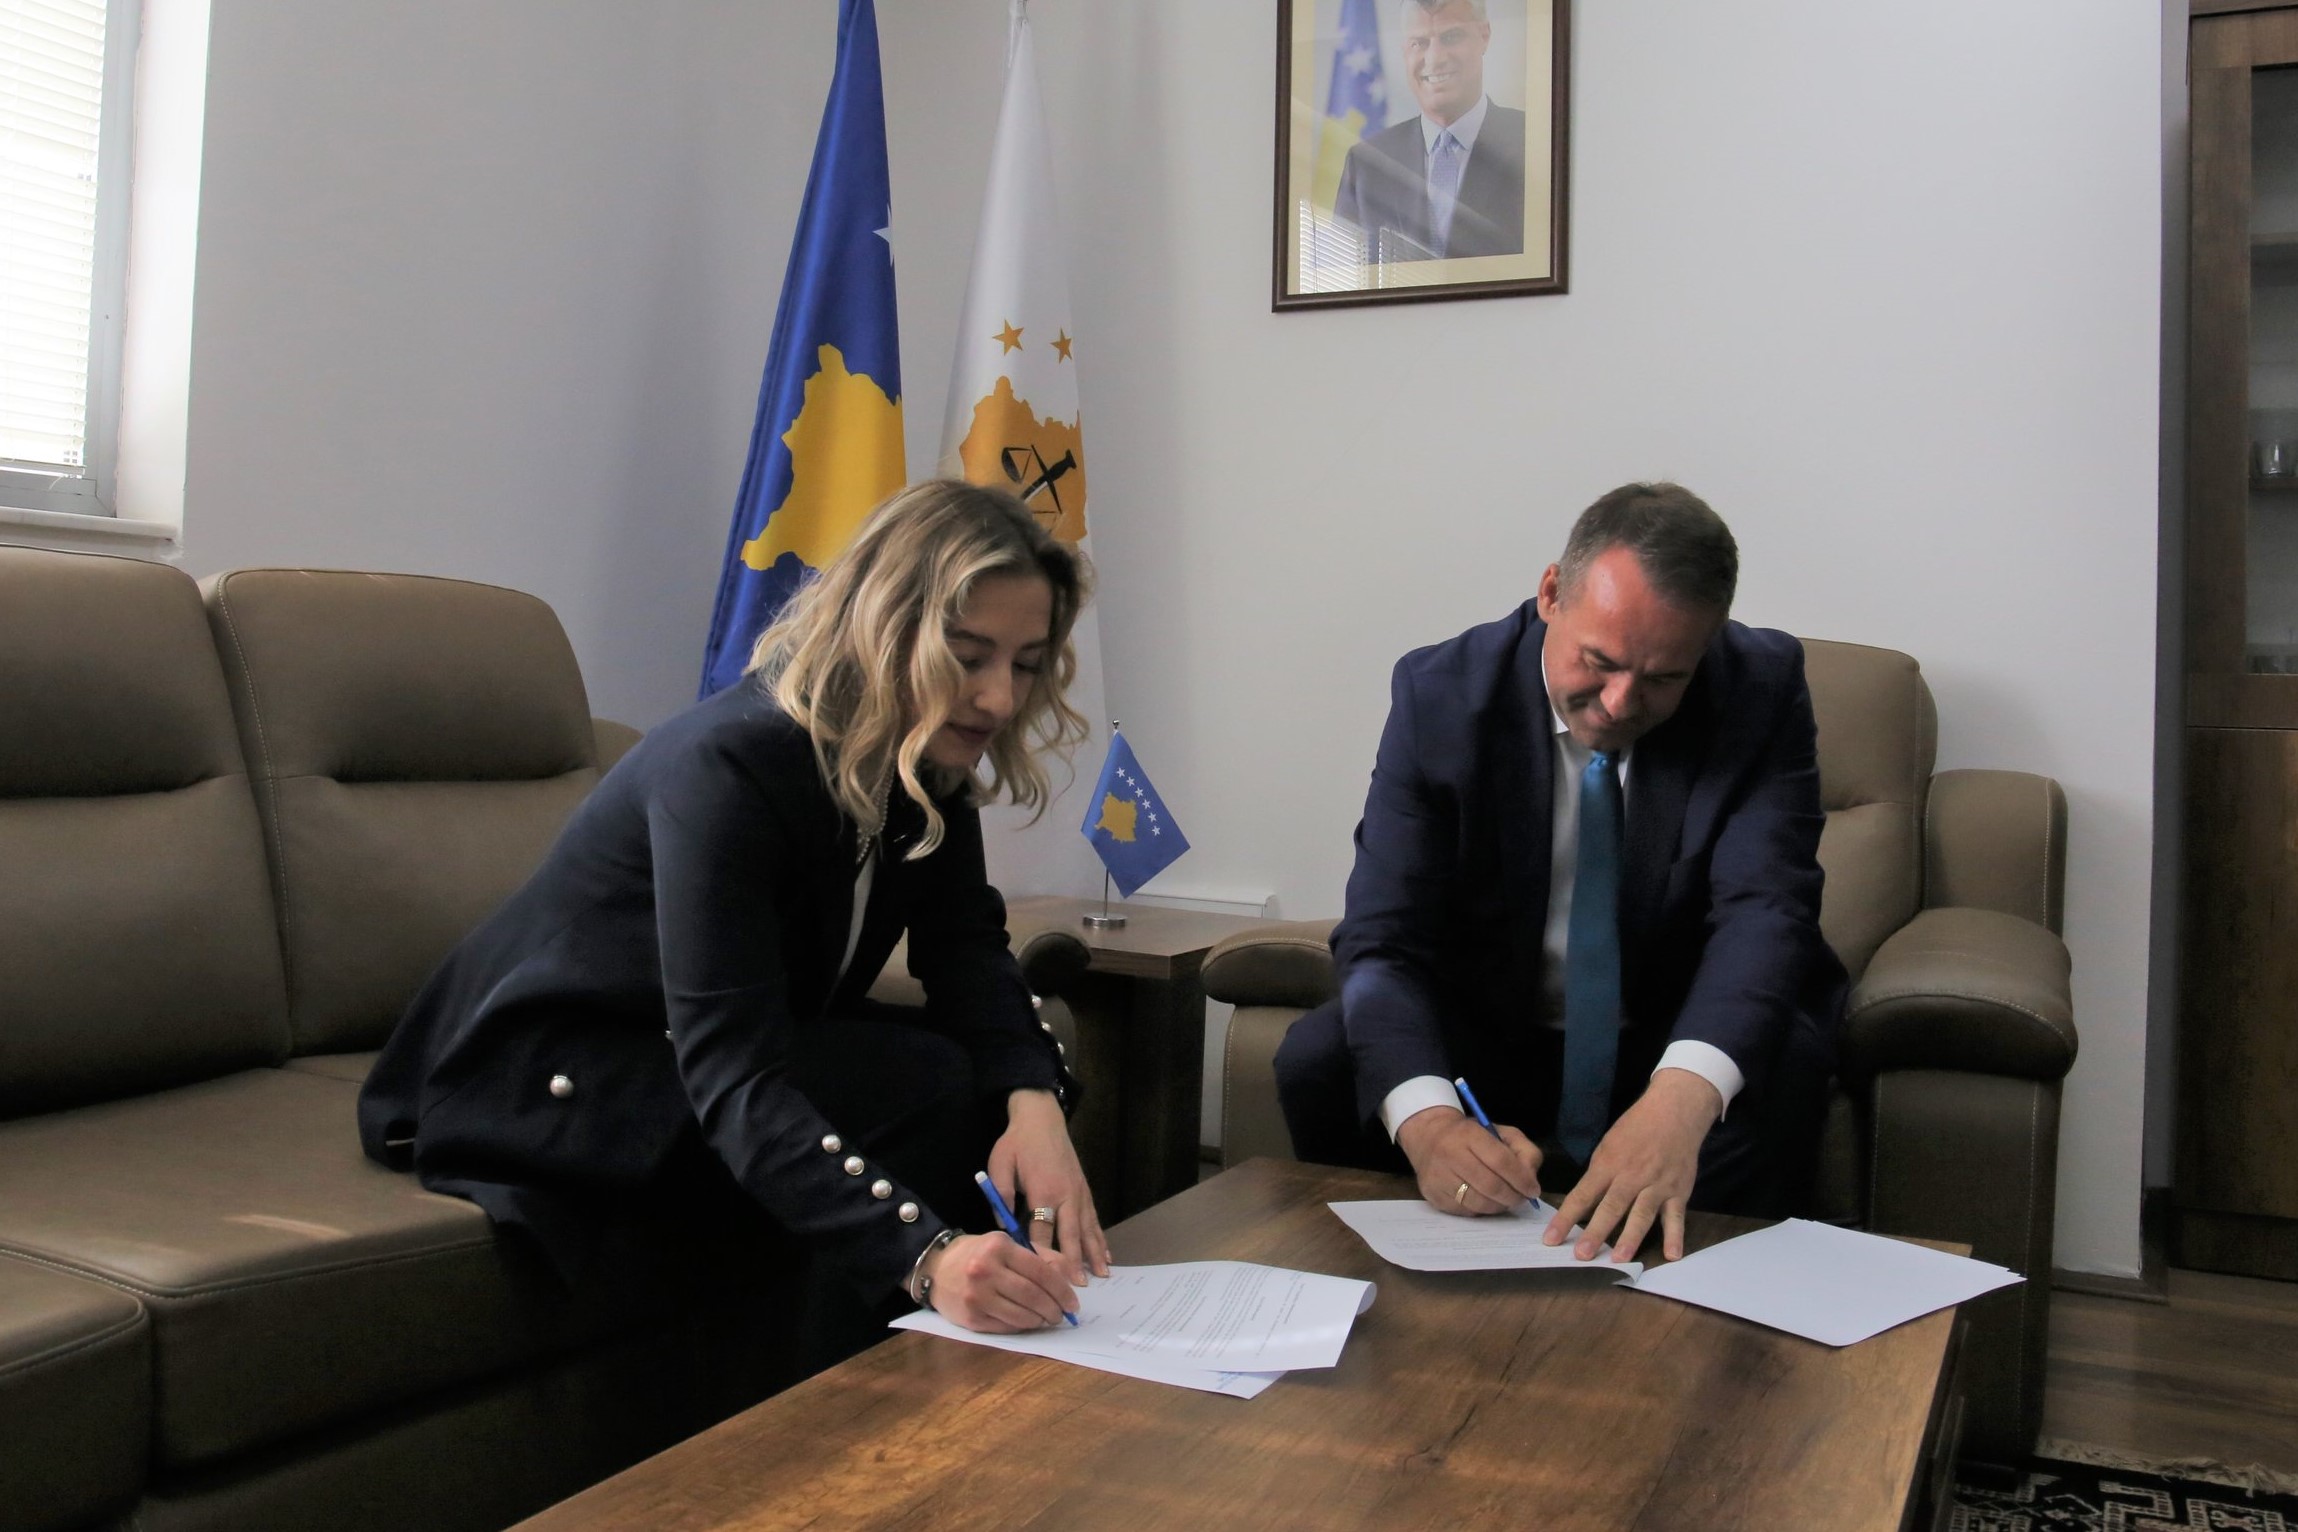 KPS and GLPS signed a memorandum of cooperation